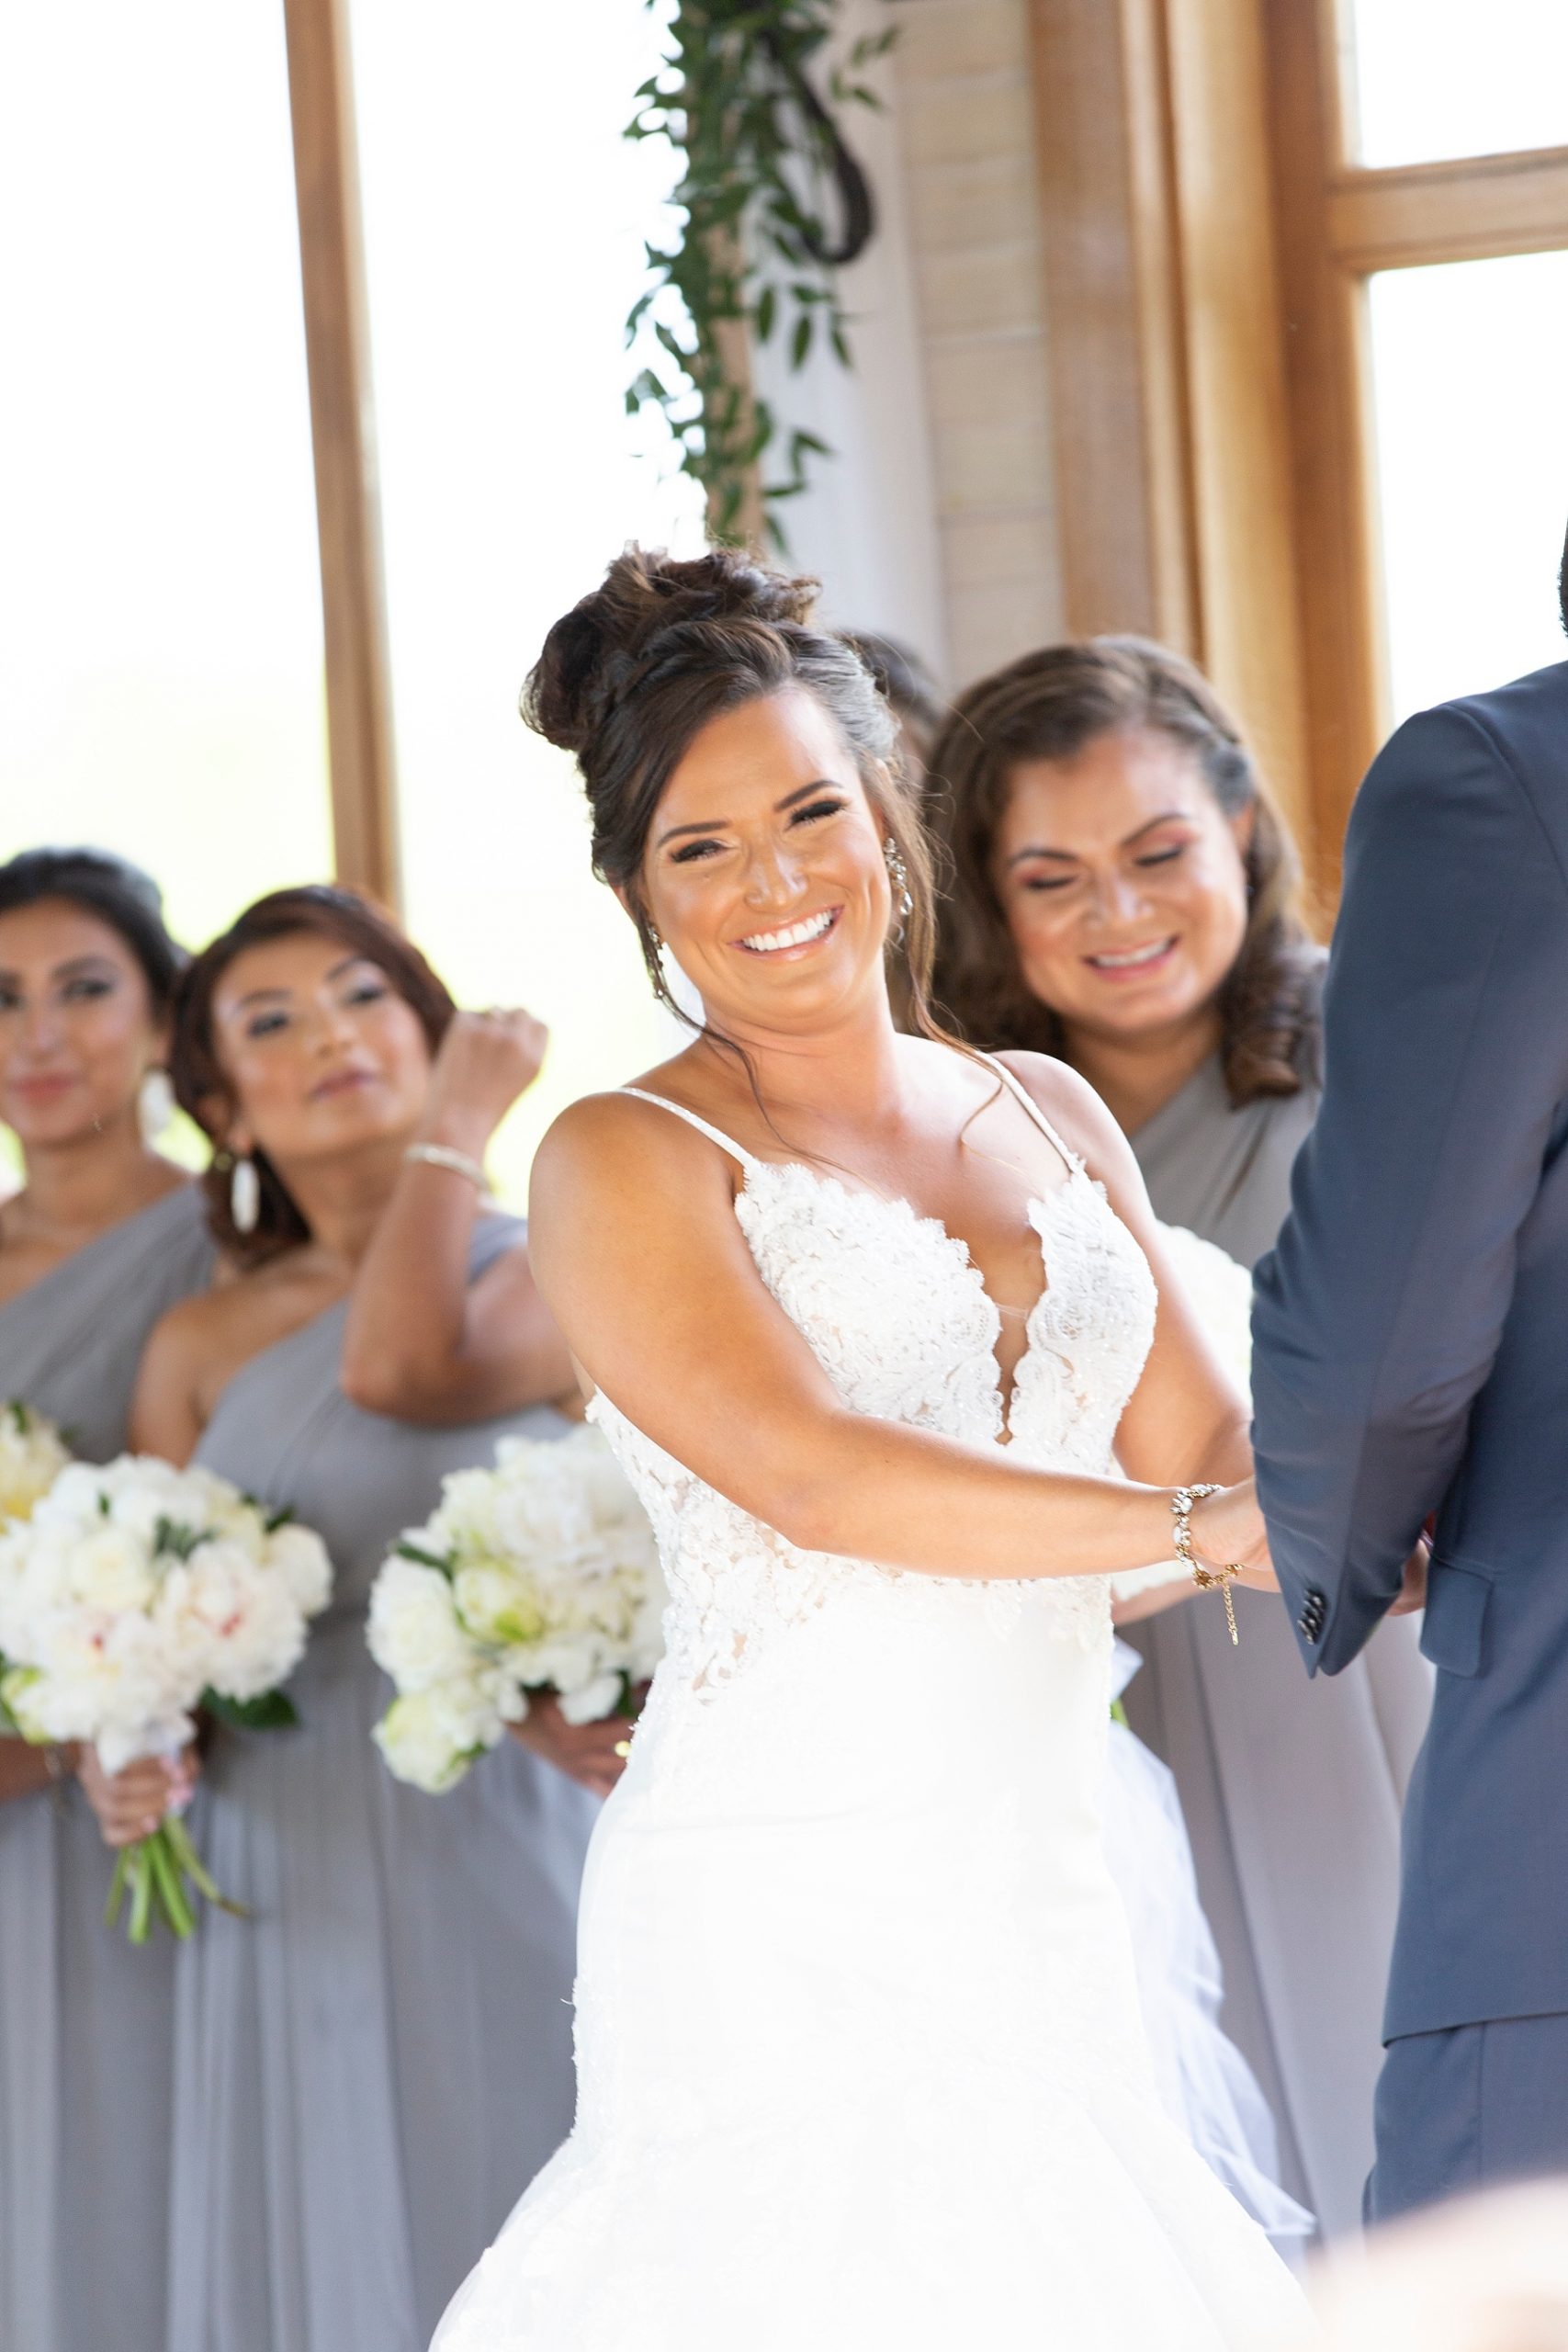 bride laughs during wedding ceremony photographed by Randi Michelle